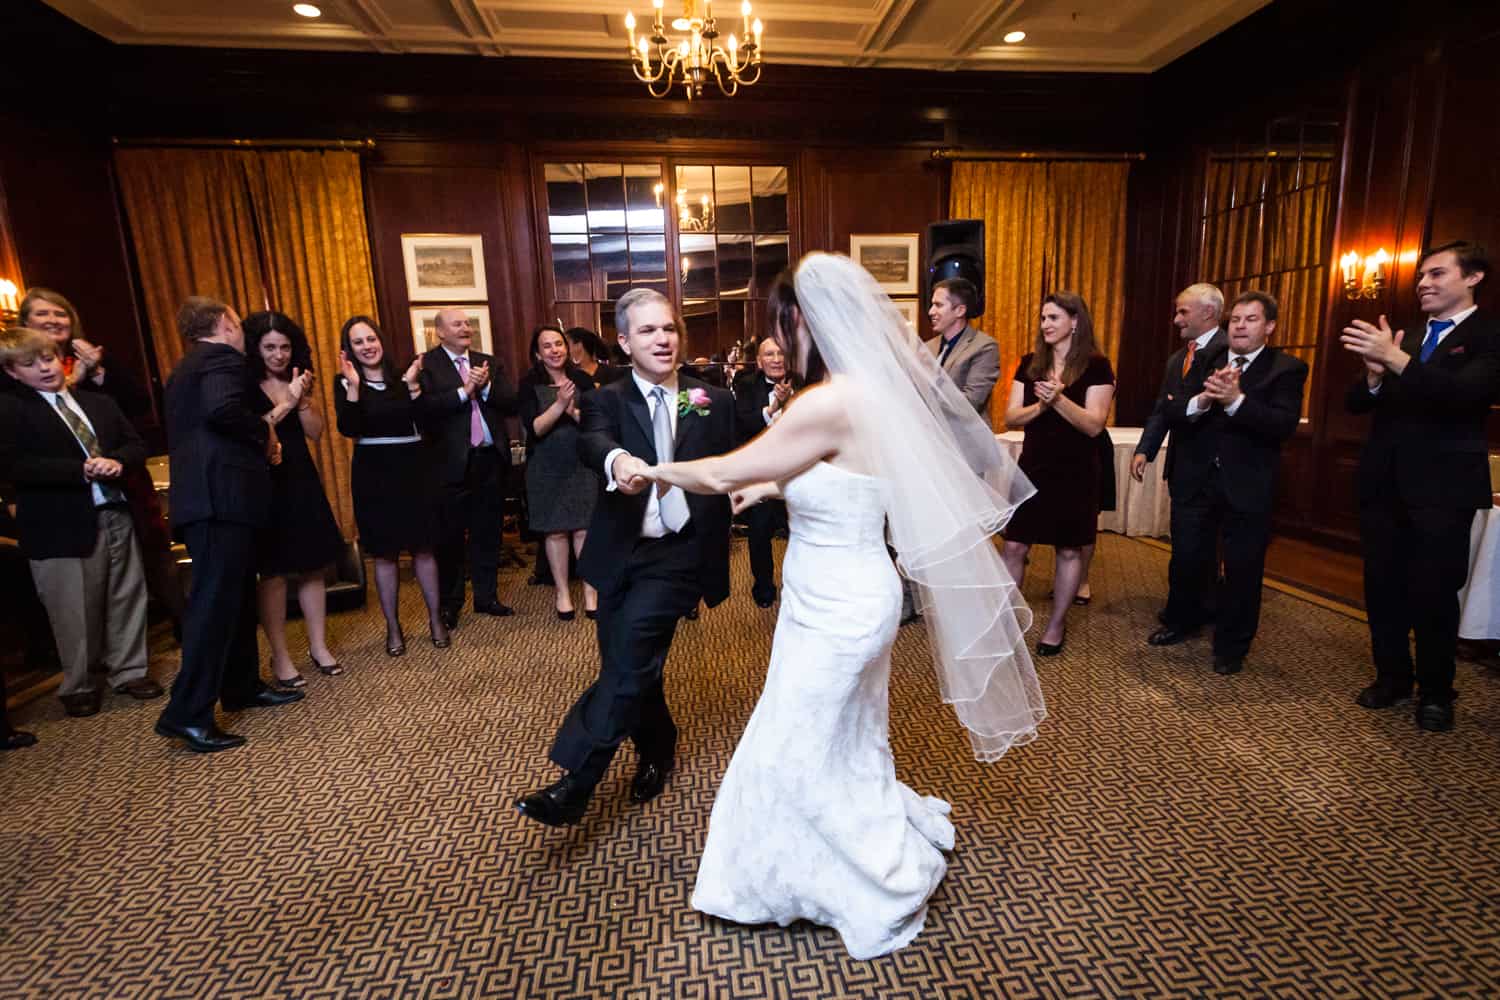 Bride and groom dancing in front of guests for article on the mysteries of photo editing